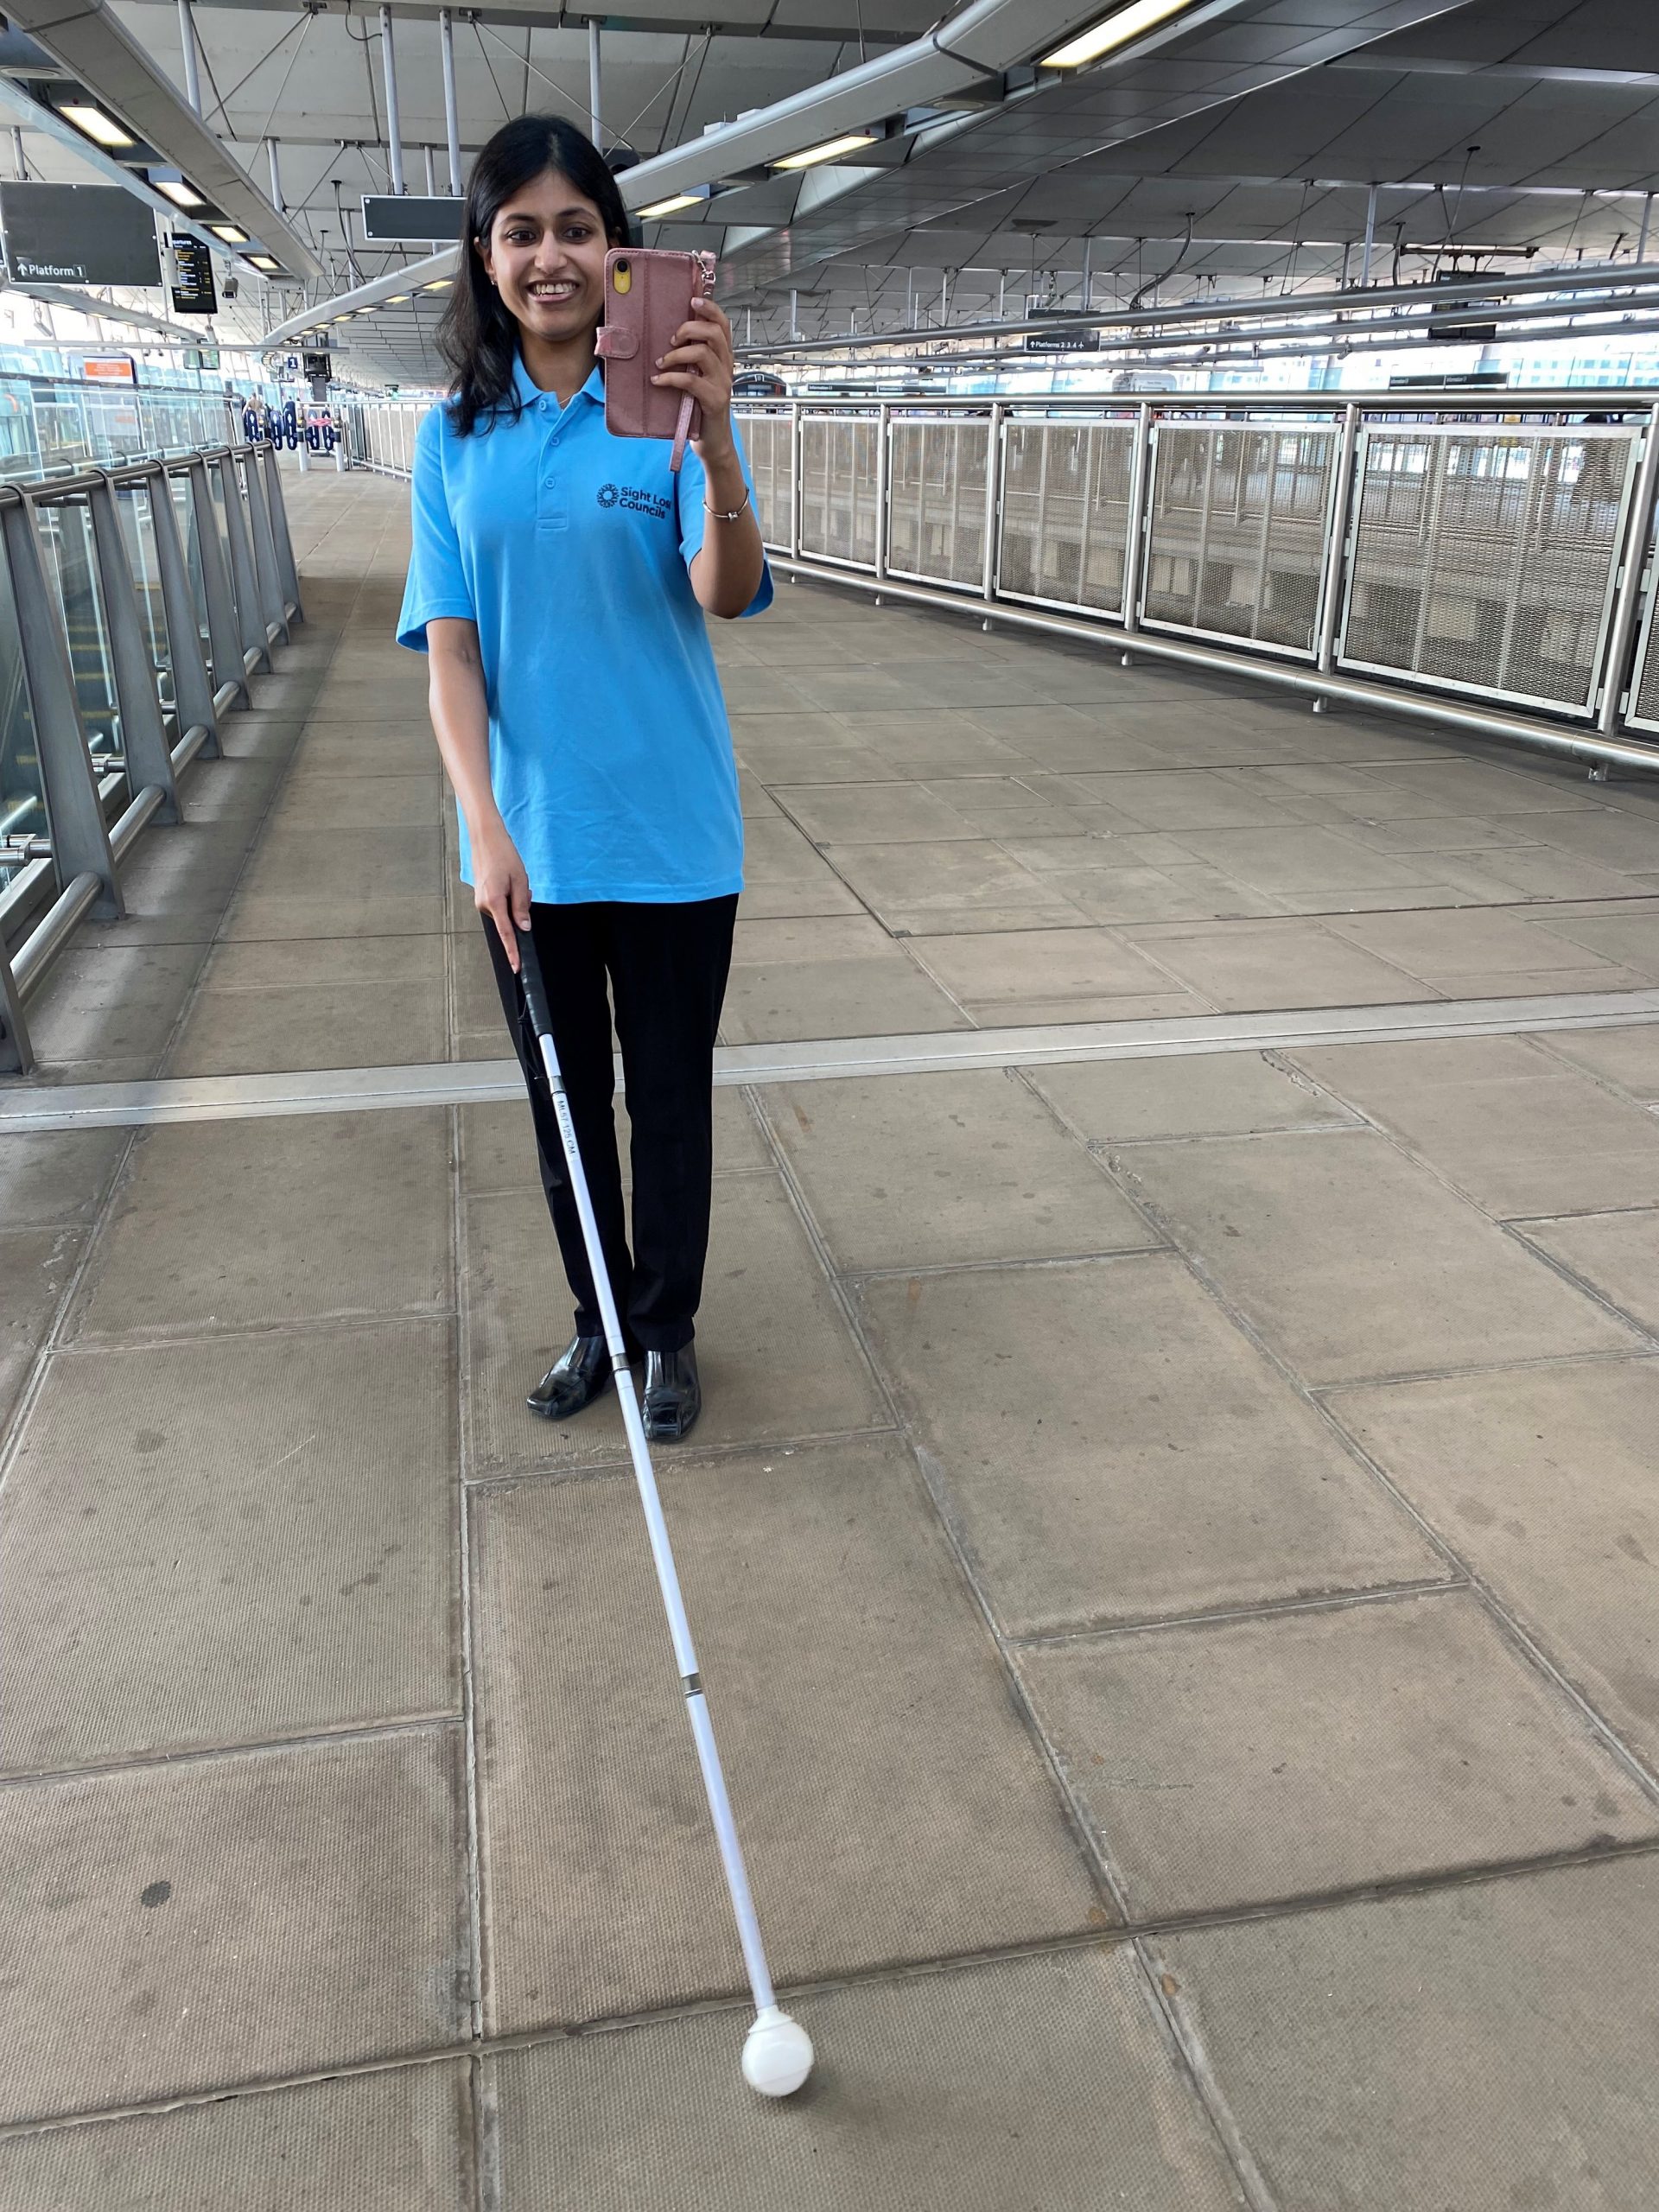 Vidya, London SLC member, is walking along a platform at London Blackfriars. She is holding her phone up in one hand and using her long cane in the other. She is smiling.